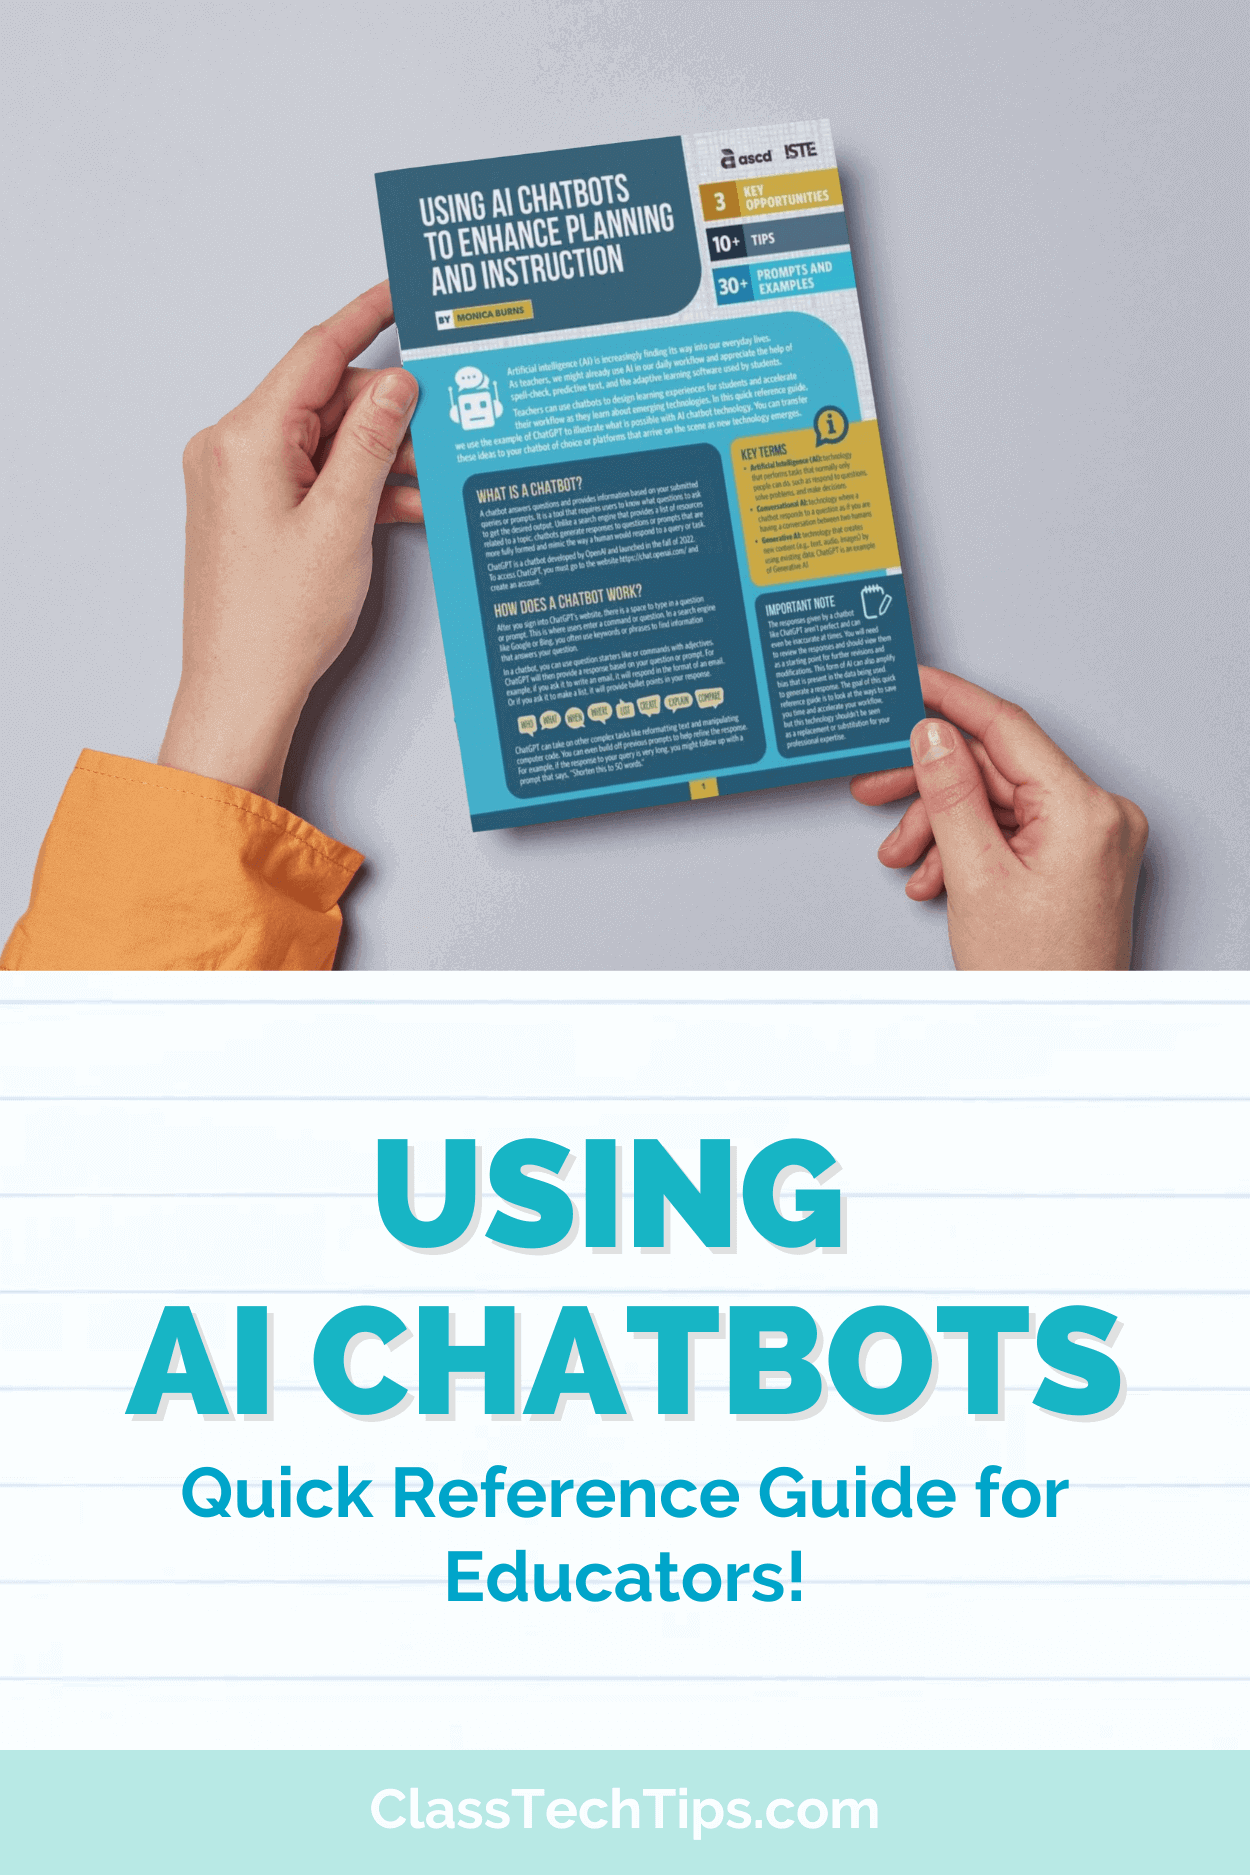 The featured image displays an individual holding Monica Burns' latest quick reference guide on utilizing AI chatbots for improved planning and instruction, symbolizing the integration of advanced technology into educational practices.